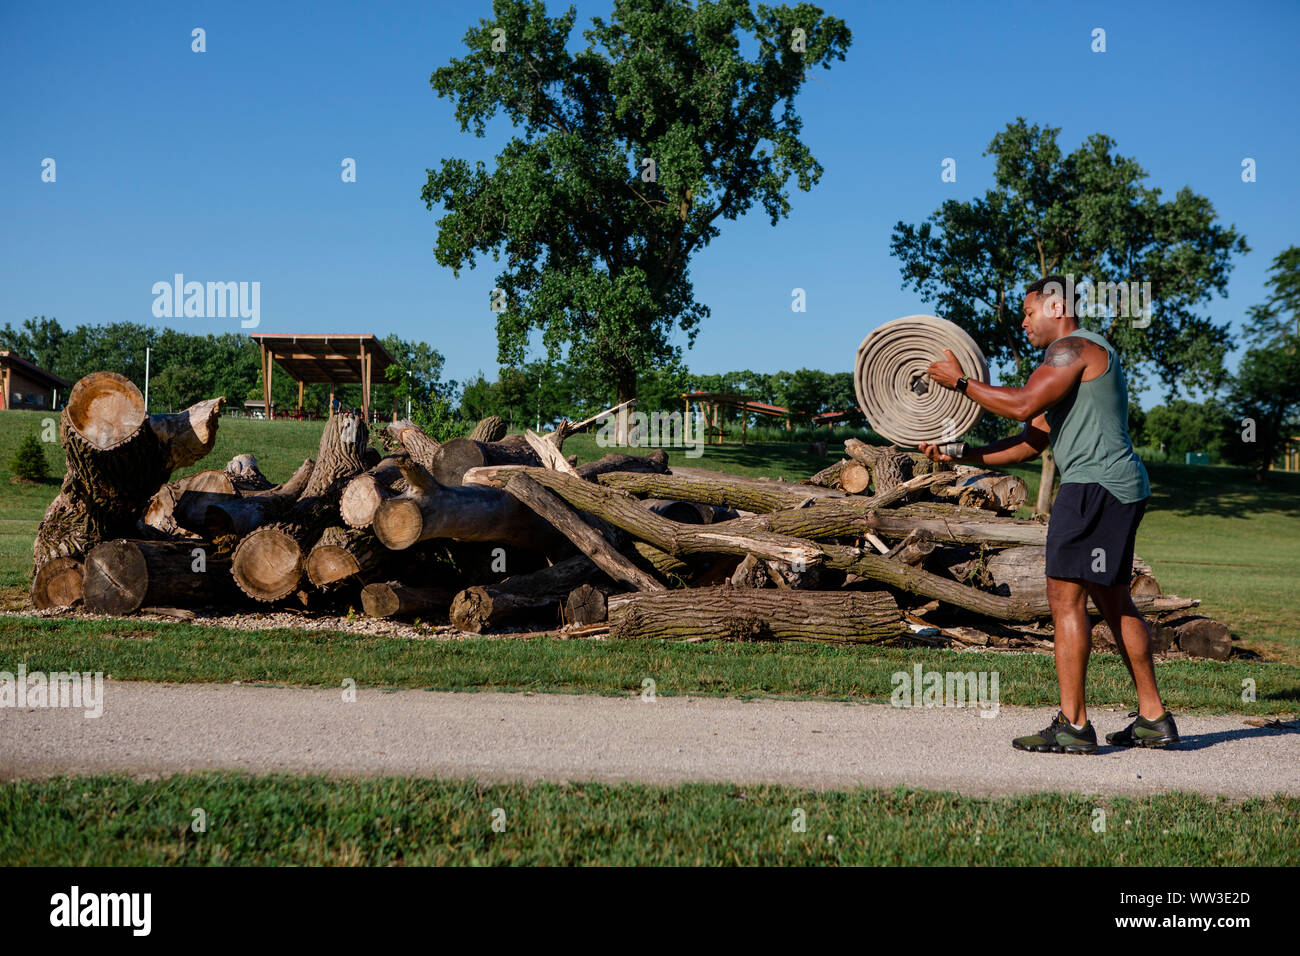 An athletic man prepares to throw a roll of heavy firehose in a park Stock Photo